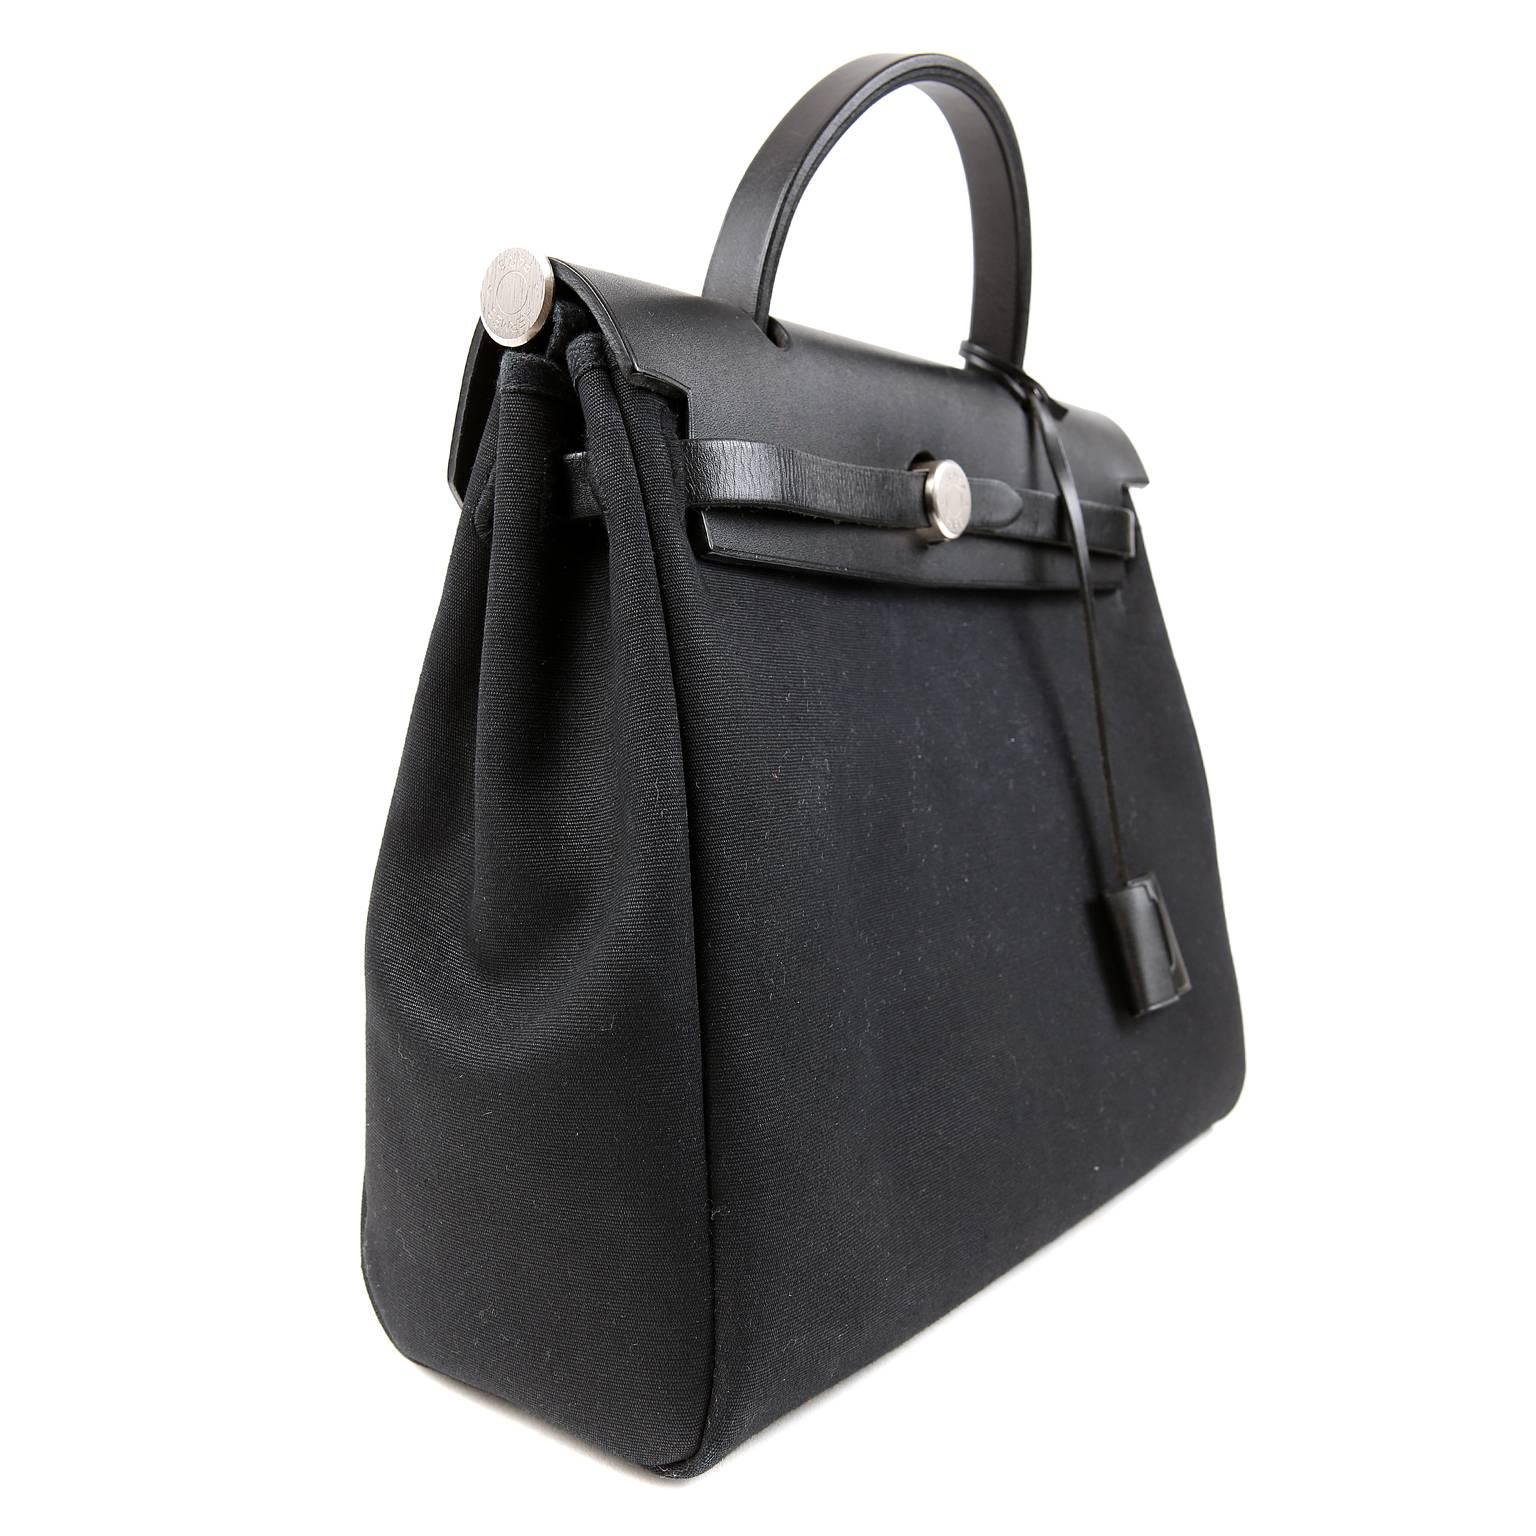 Hermès Black Her Bag- Pristine   Condition, appearing never carried
The Her Bag is comprised of toile fabric with a rigid leather top.  It has a similar look to the Kelly but with a far less demanding price tag.  Best of all, the Her comes with an